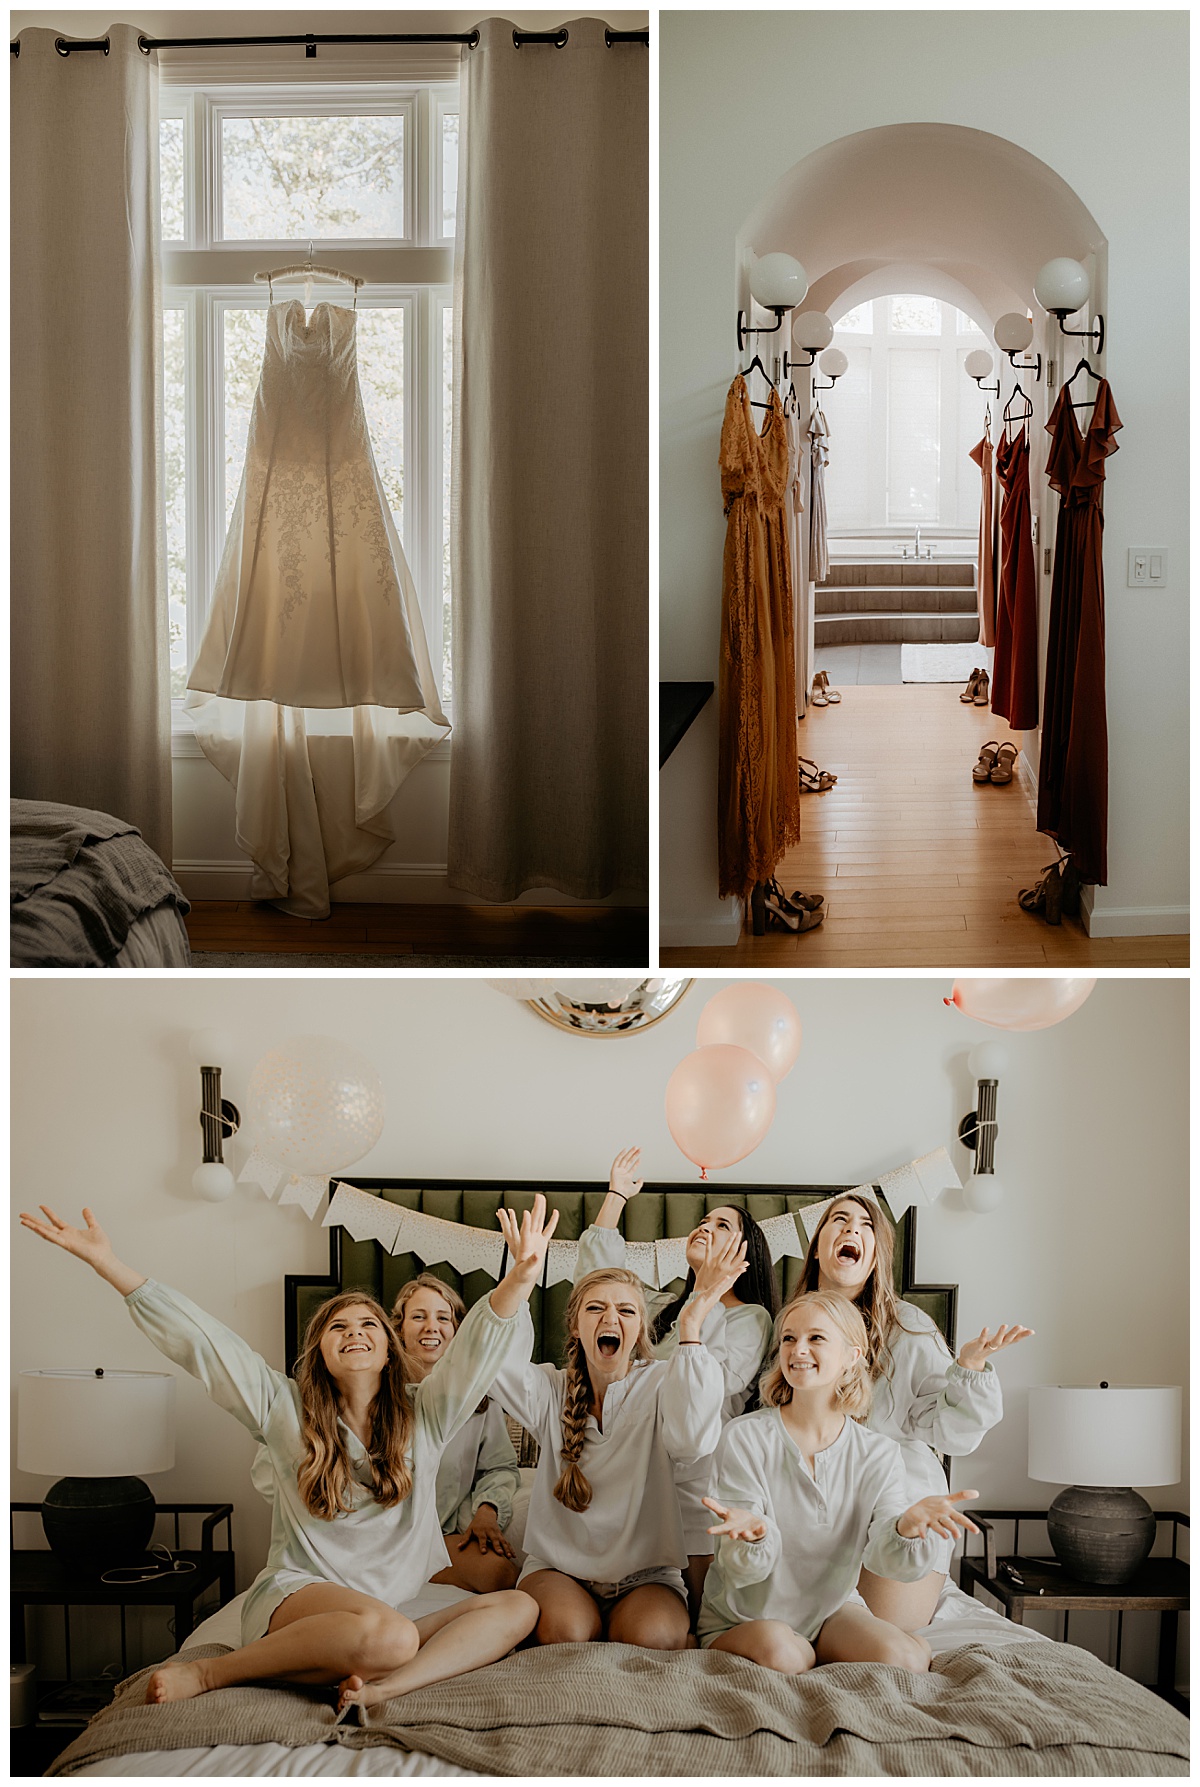 gowns hang in hallway by windows for bridesmaids to get ready by Brea Warren Photo